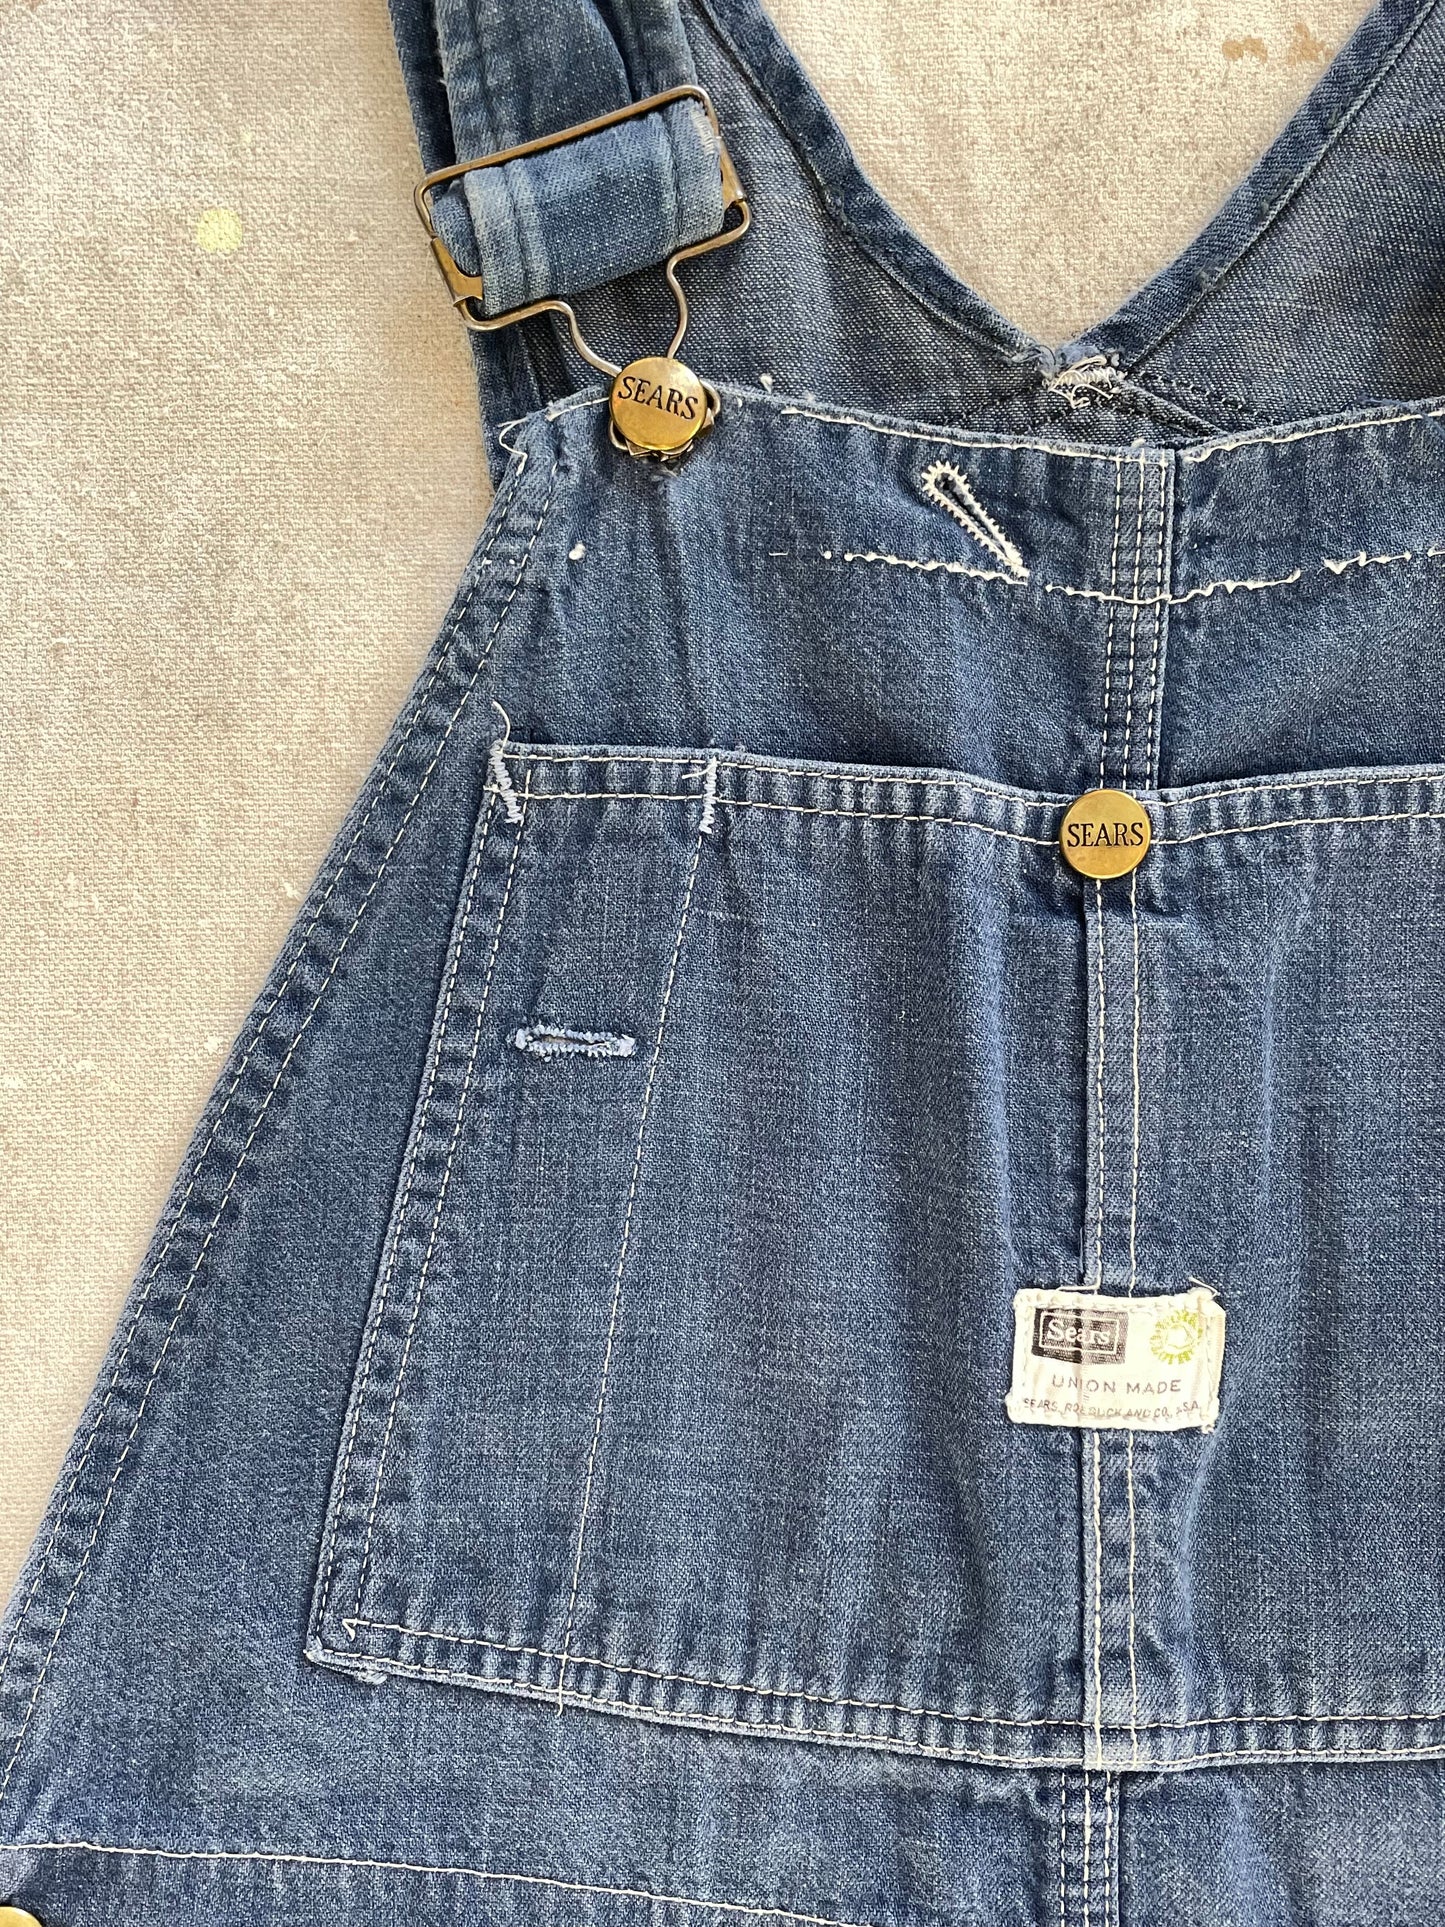 70s Sears Roebuck Cropped Overalls